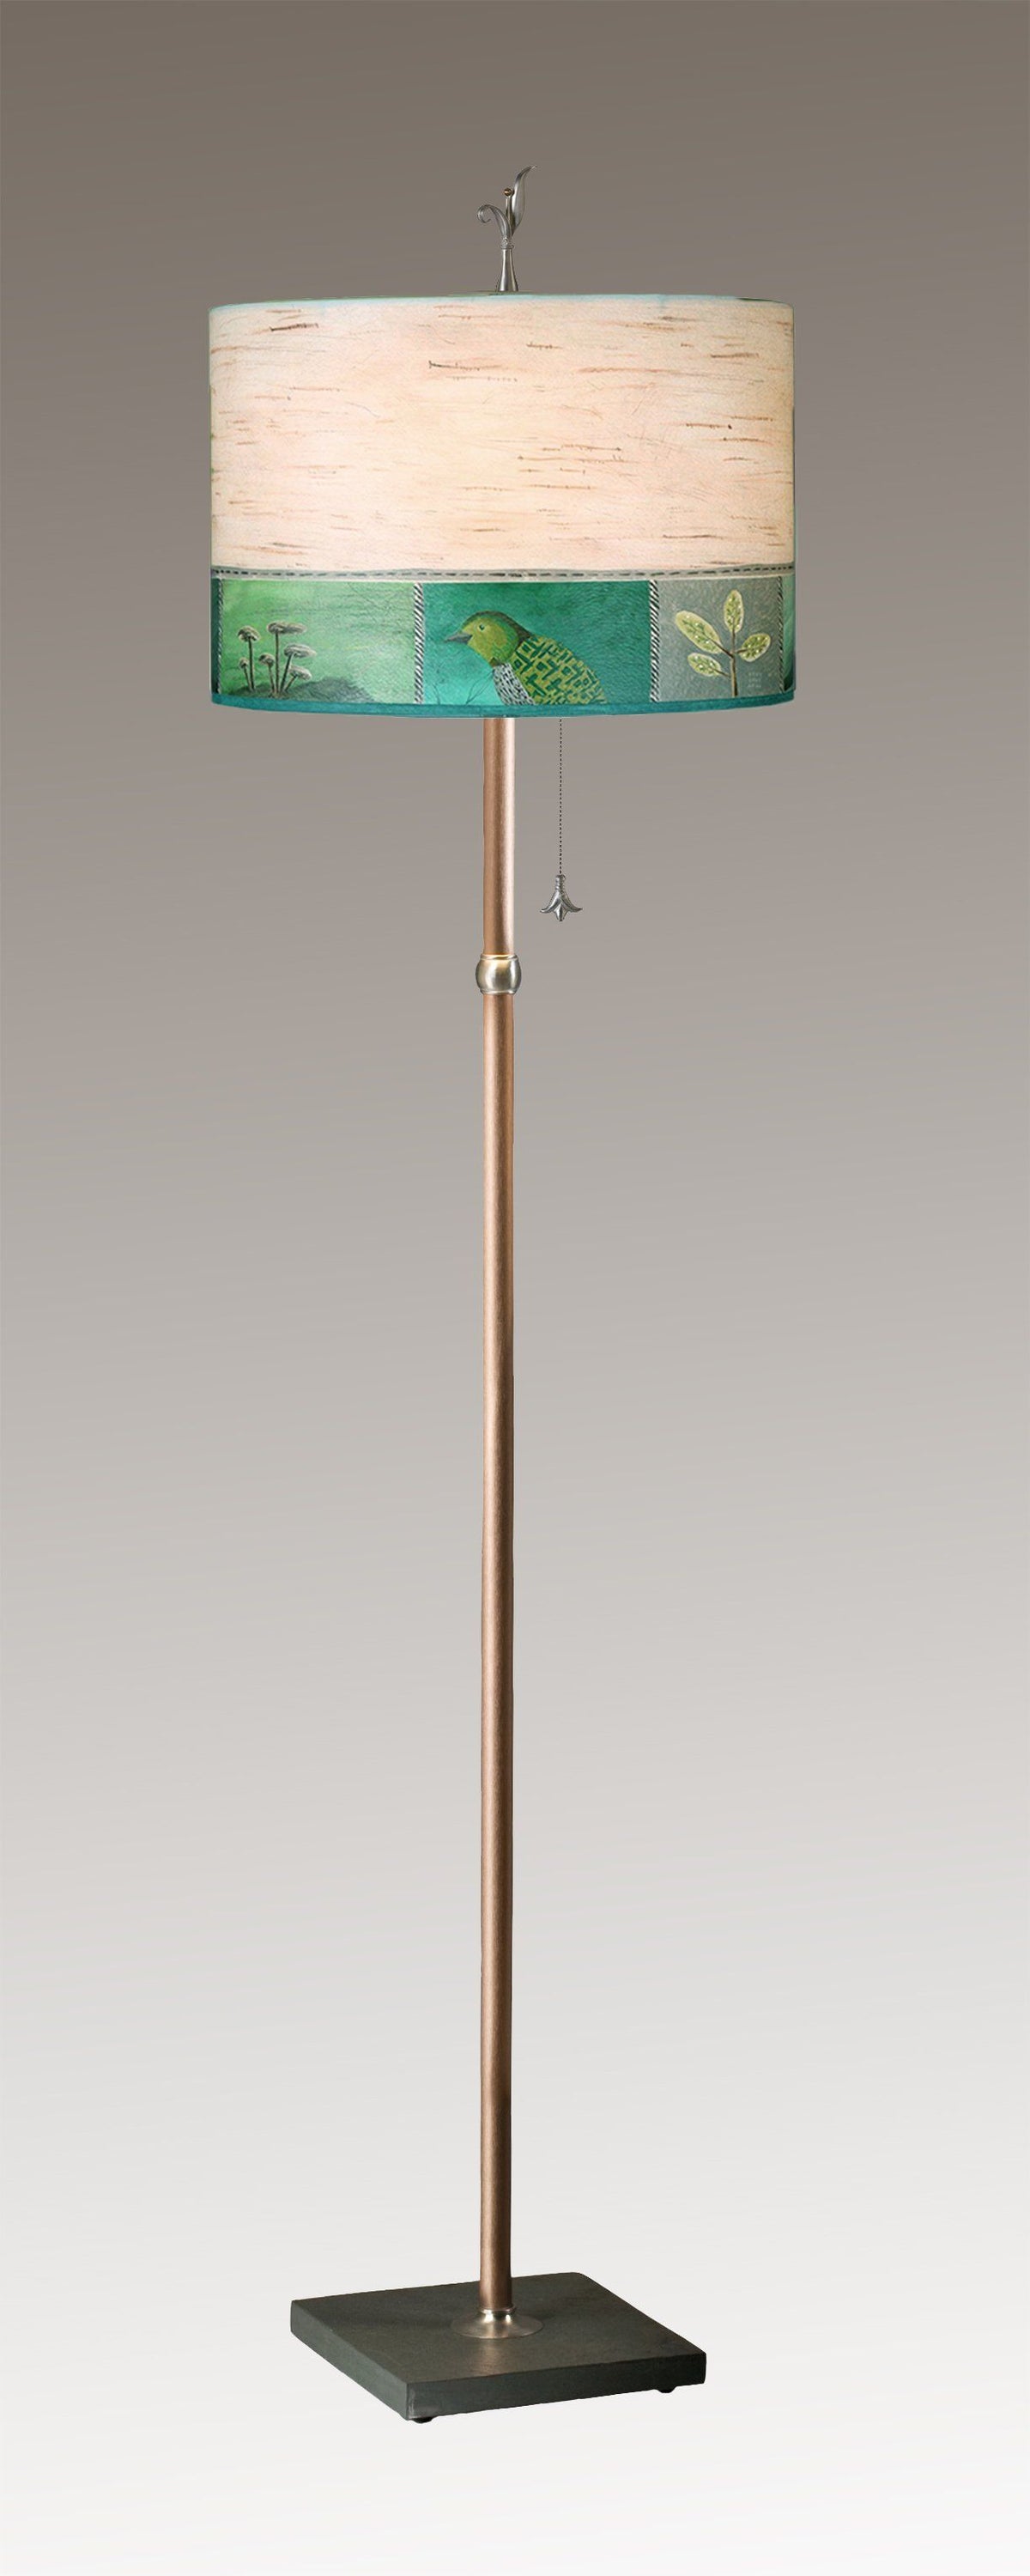 Copper Floor Lamp Large Drum Shade in Woodland Trails in Birch